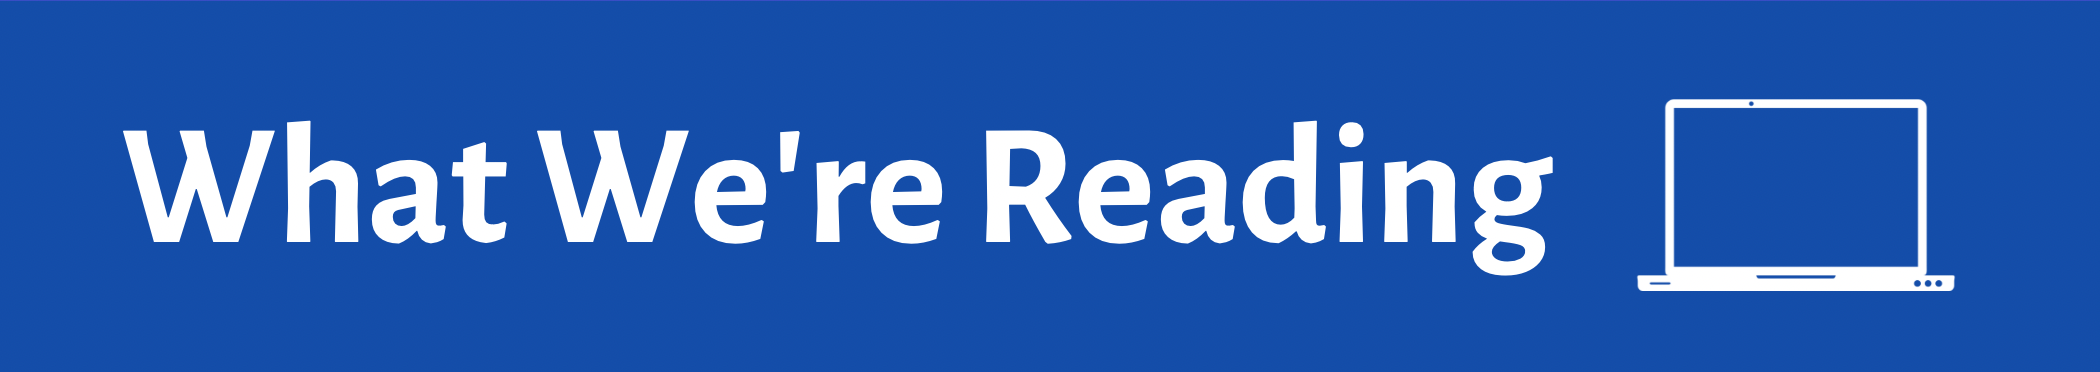 what we are reading banner